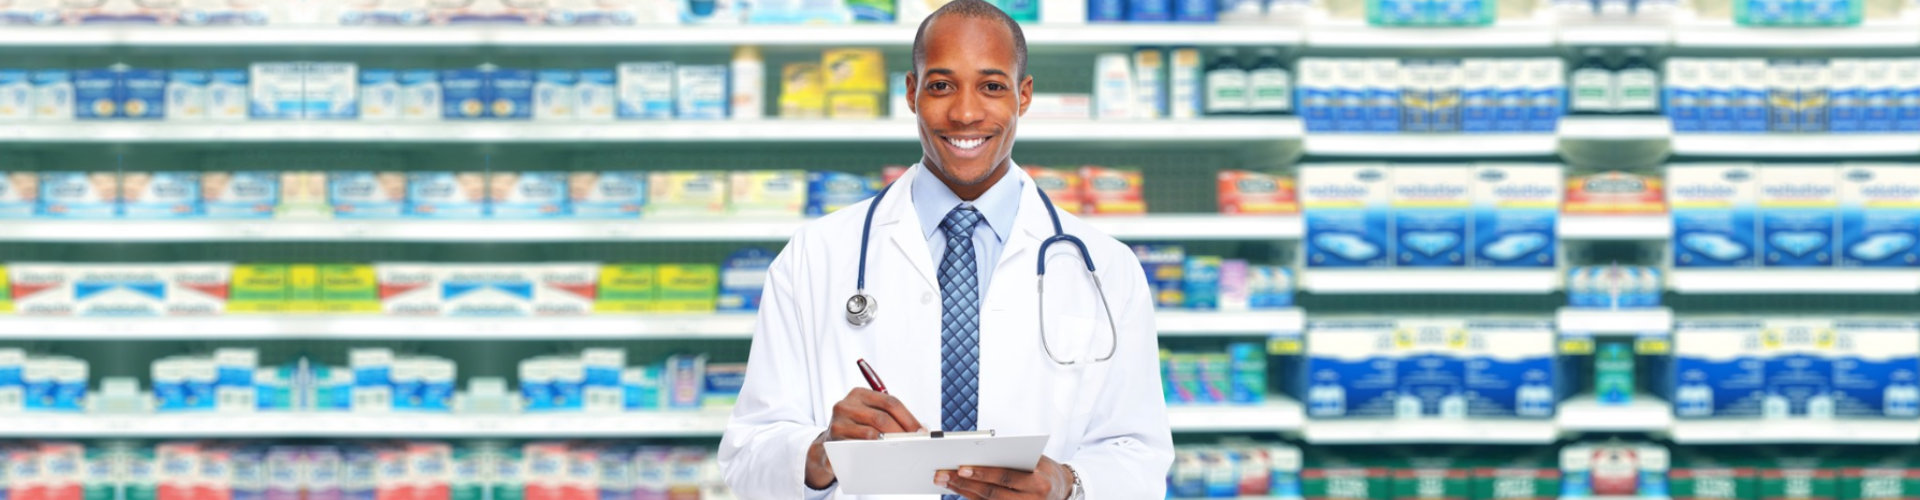 male pharmacist smiling while holding a form